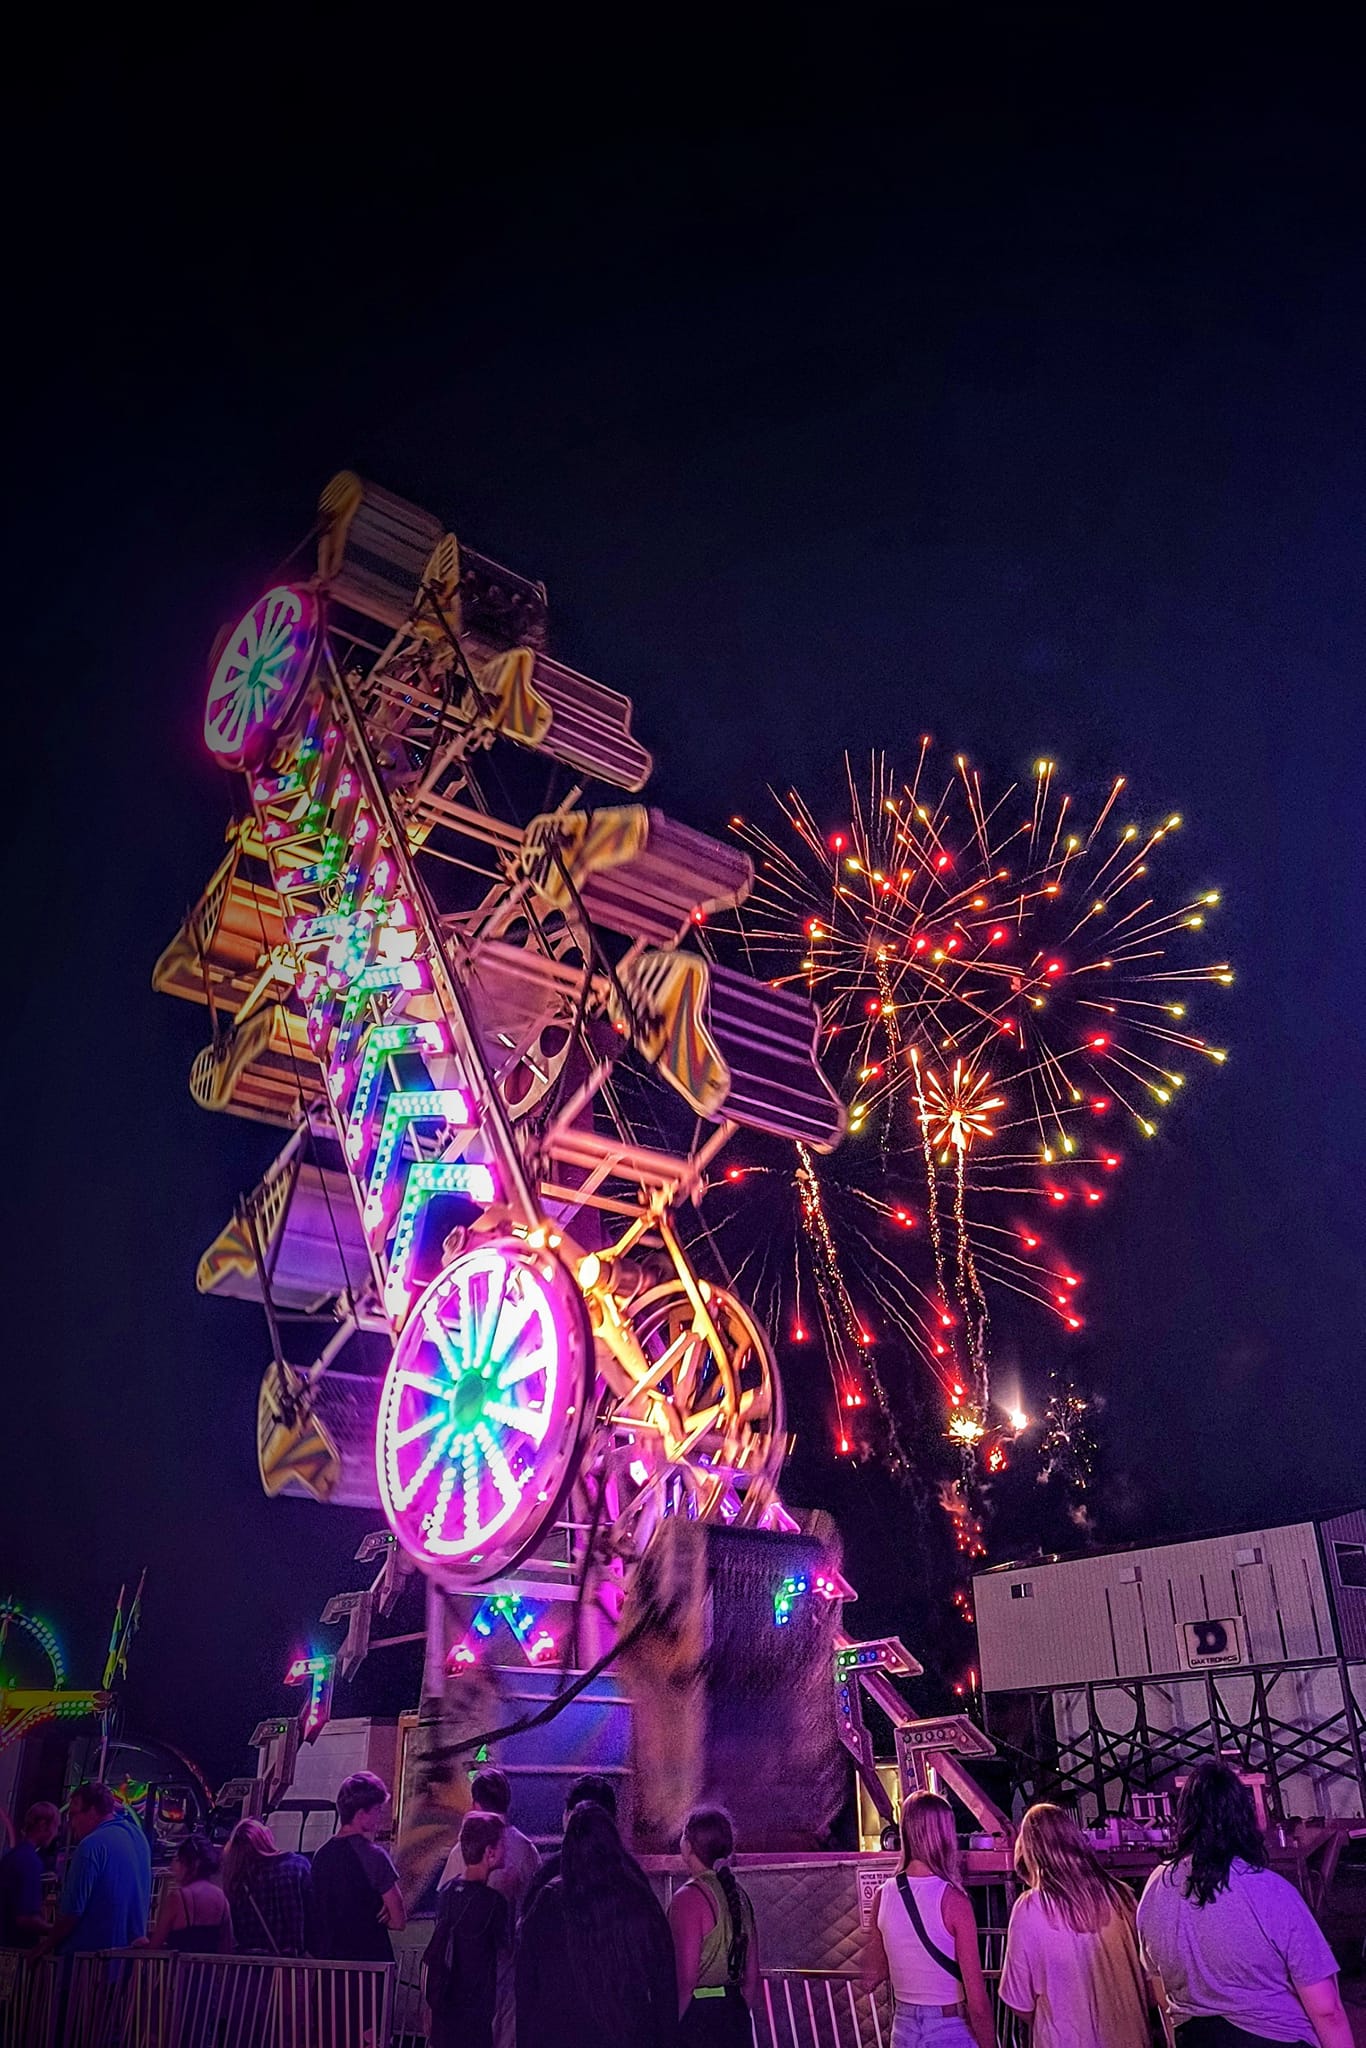 midway ride and fireworks